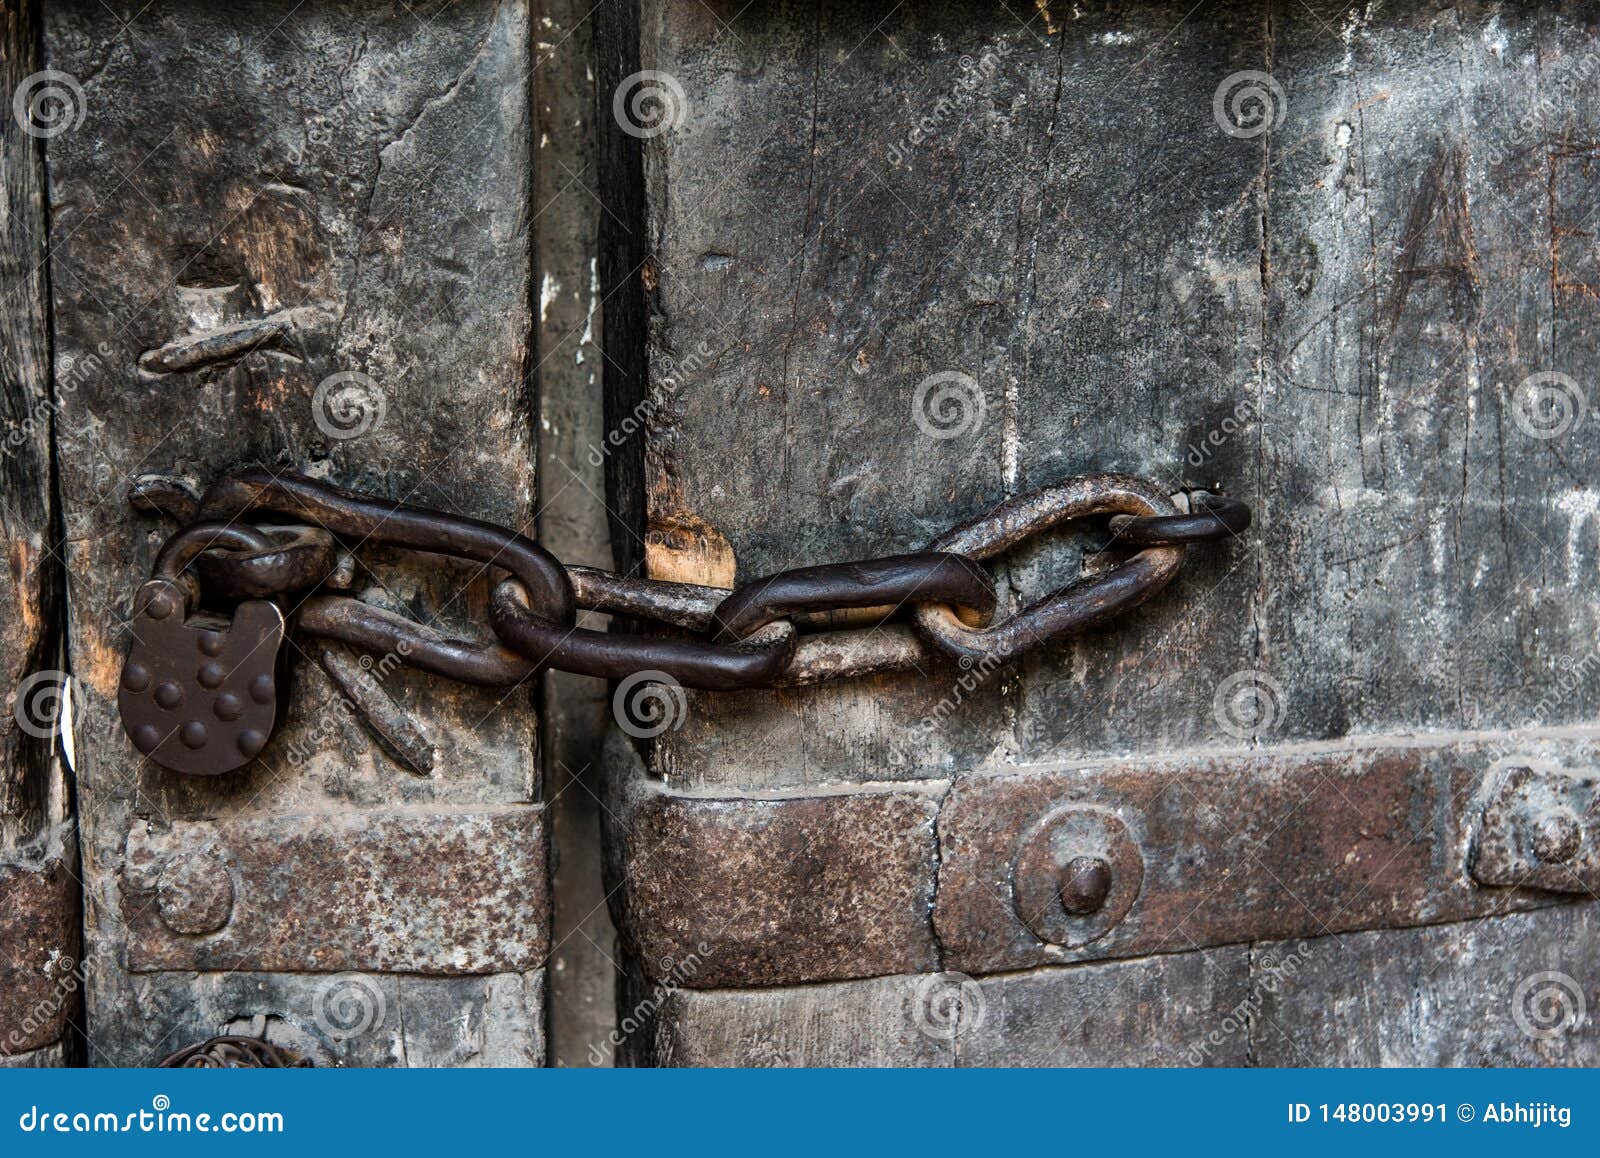 Ancient Old Chain with Lock Concept on Old Door, Wallpaper, Background  Stock Image - Image of antique, iron: 148003991